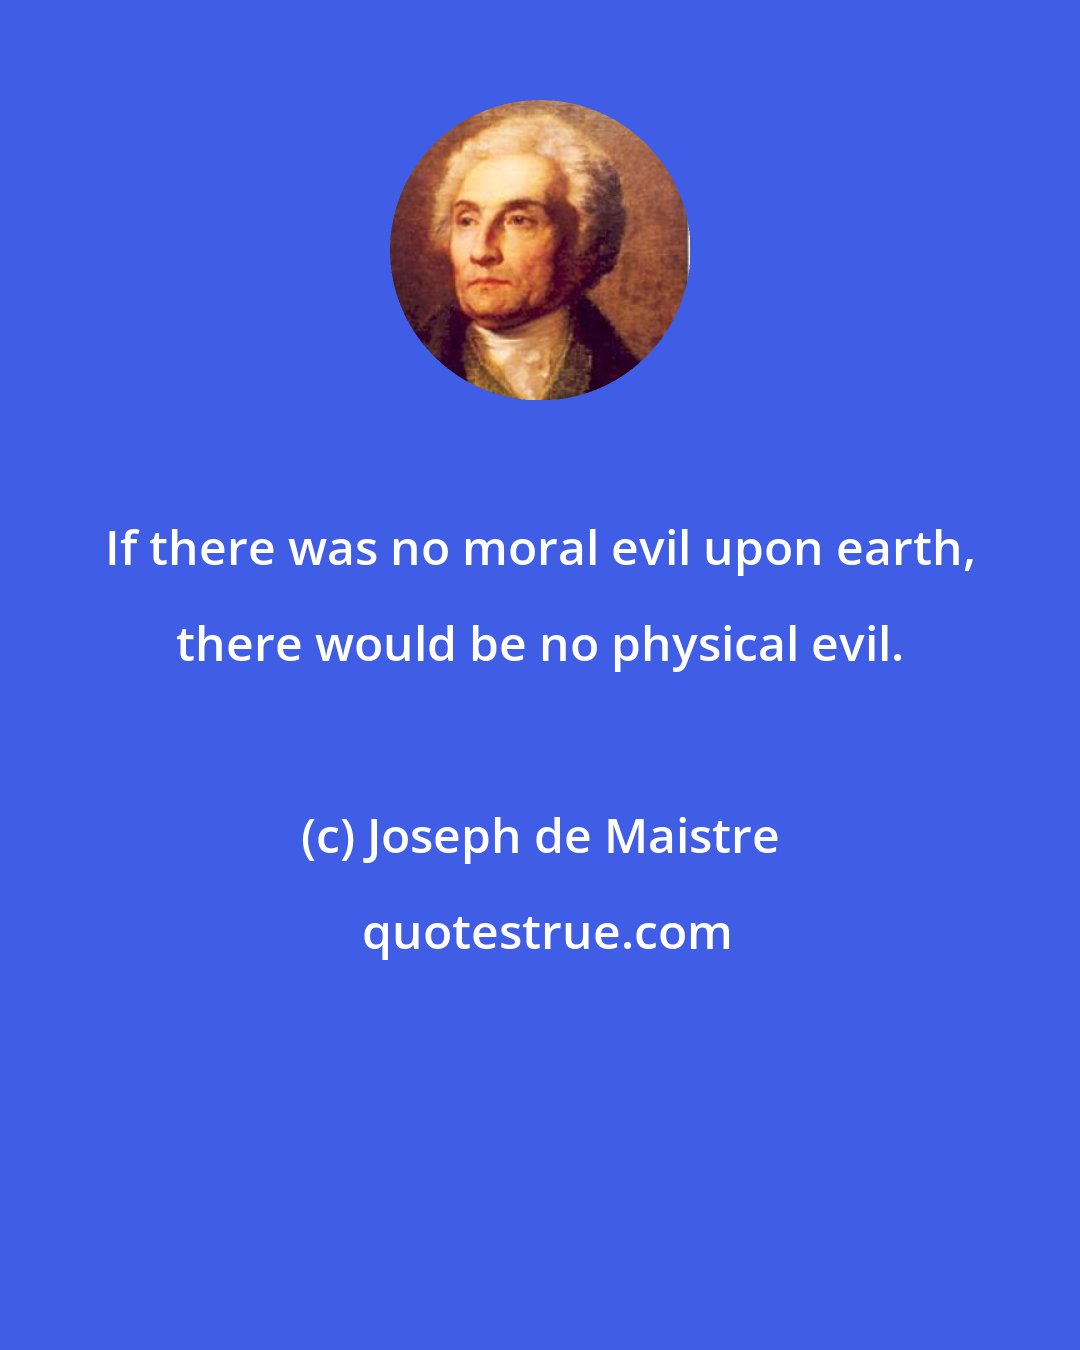 Joseph de Maistre: If there was no moral evil upon earth, there would be no physical evil.